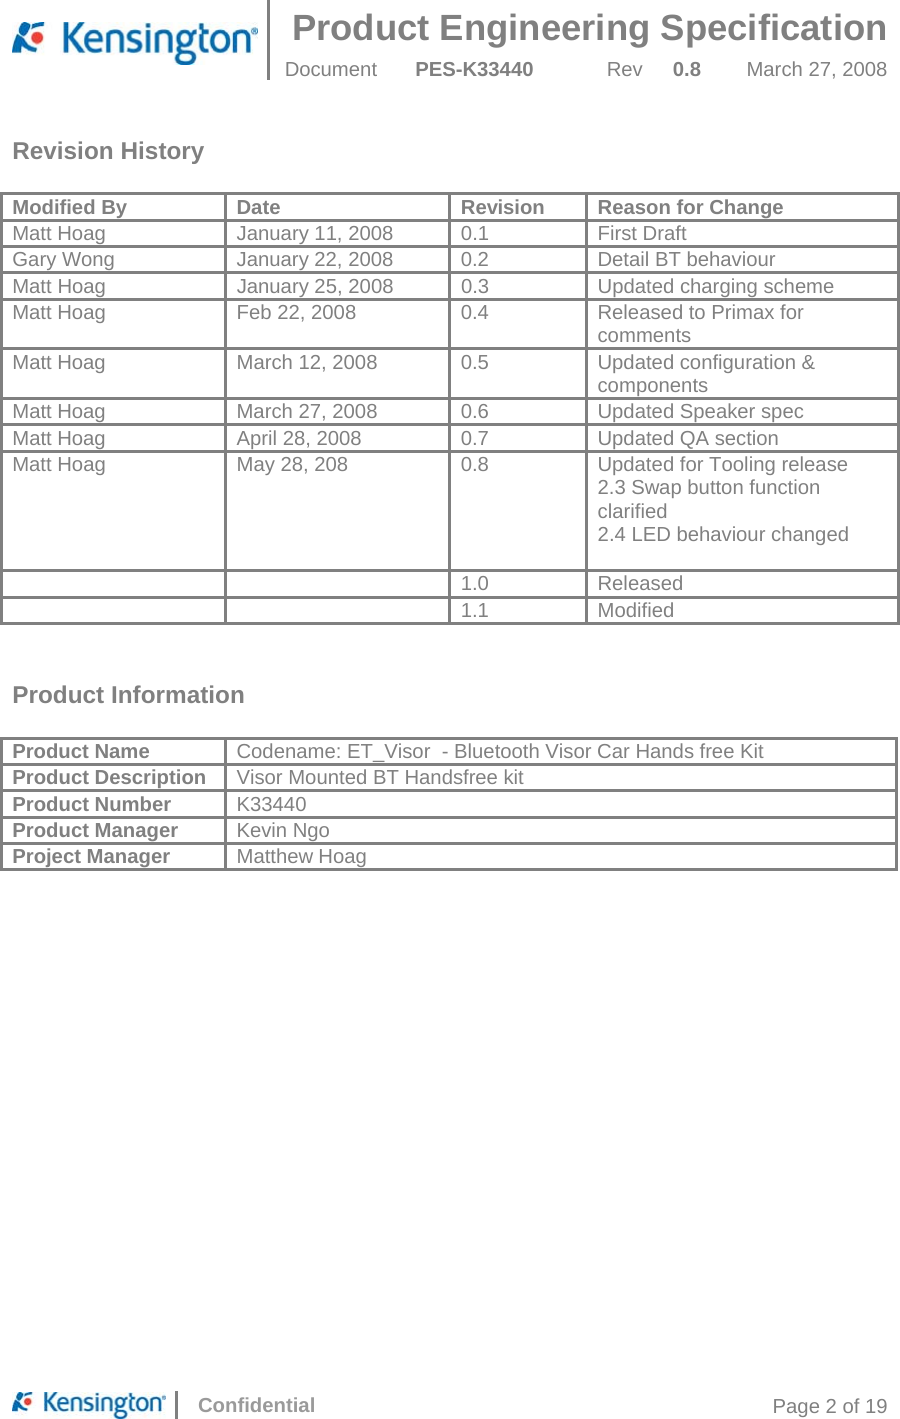 Product Engineering Specification  Document  PES-K33440 Rev 0.8 March 27, 2008      Confidential  Page 2 of 19 Revision History  Modified By  Date  Revision  Reason for Change Matt Hoag  January 11, 2008  0.1  First Draft Gary Wong  January 22, 2008  0.2  Detail BT behaviour Matt Hoag  January 25, 2008  0.3  Updated charging scheme Matt Hoag  Feb 22, 2008  0.4  Released to Primax for comments Matt Hoag  March 12, 2008  0.5  Updated configuration &amp; components Matt Hoag  March 27, 2008  0.6  Updated Speaker spec Matt Hoag  April 28, 2008  0.7  Updated QA section Matt Hoag  May 28, 208  0.8  Updated for Tooling release 2.3 Swap button function clarified 2.4 LED behaviour changed    1.0 Released   1.1 Modified   Product Information  Product Name  Codename: ET_Visor  - Bluetooth Visor Car Hands free Kit Product Description Visor Mounted BT Handsfree kit Product Number  K33440 Product Manager  Kevin Ngo Project Manager  Matthew Hoag 